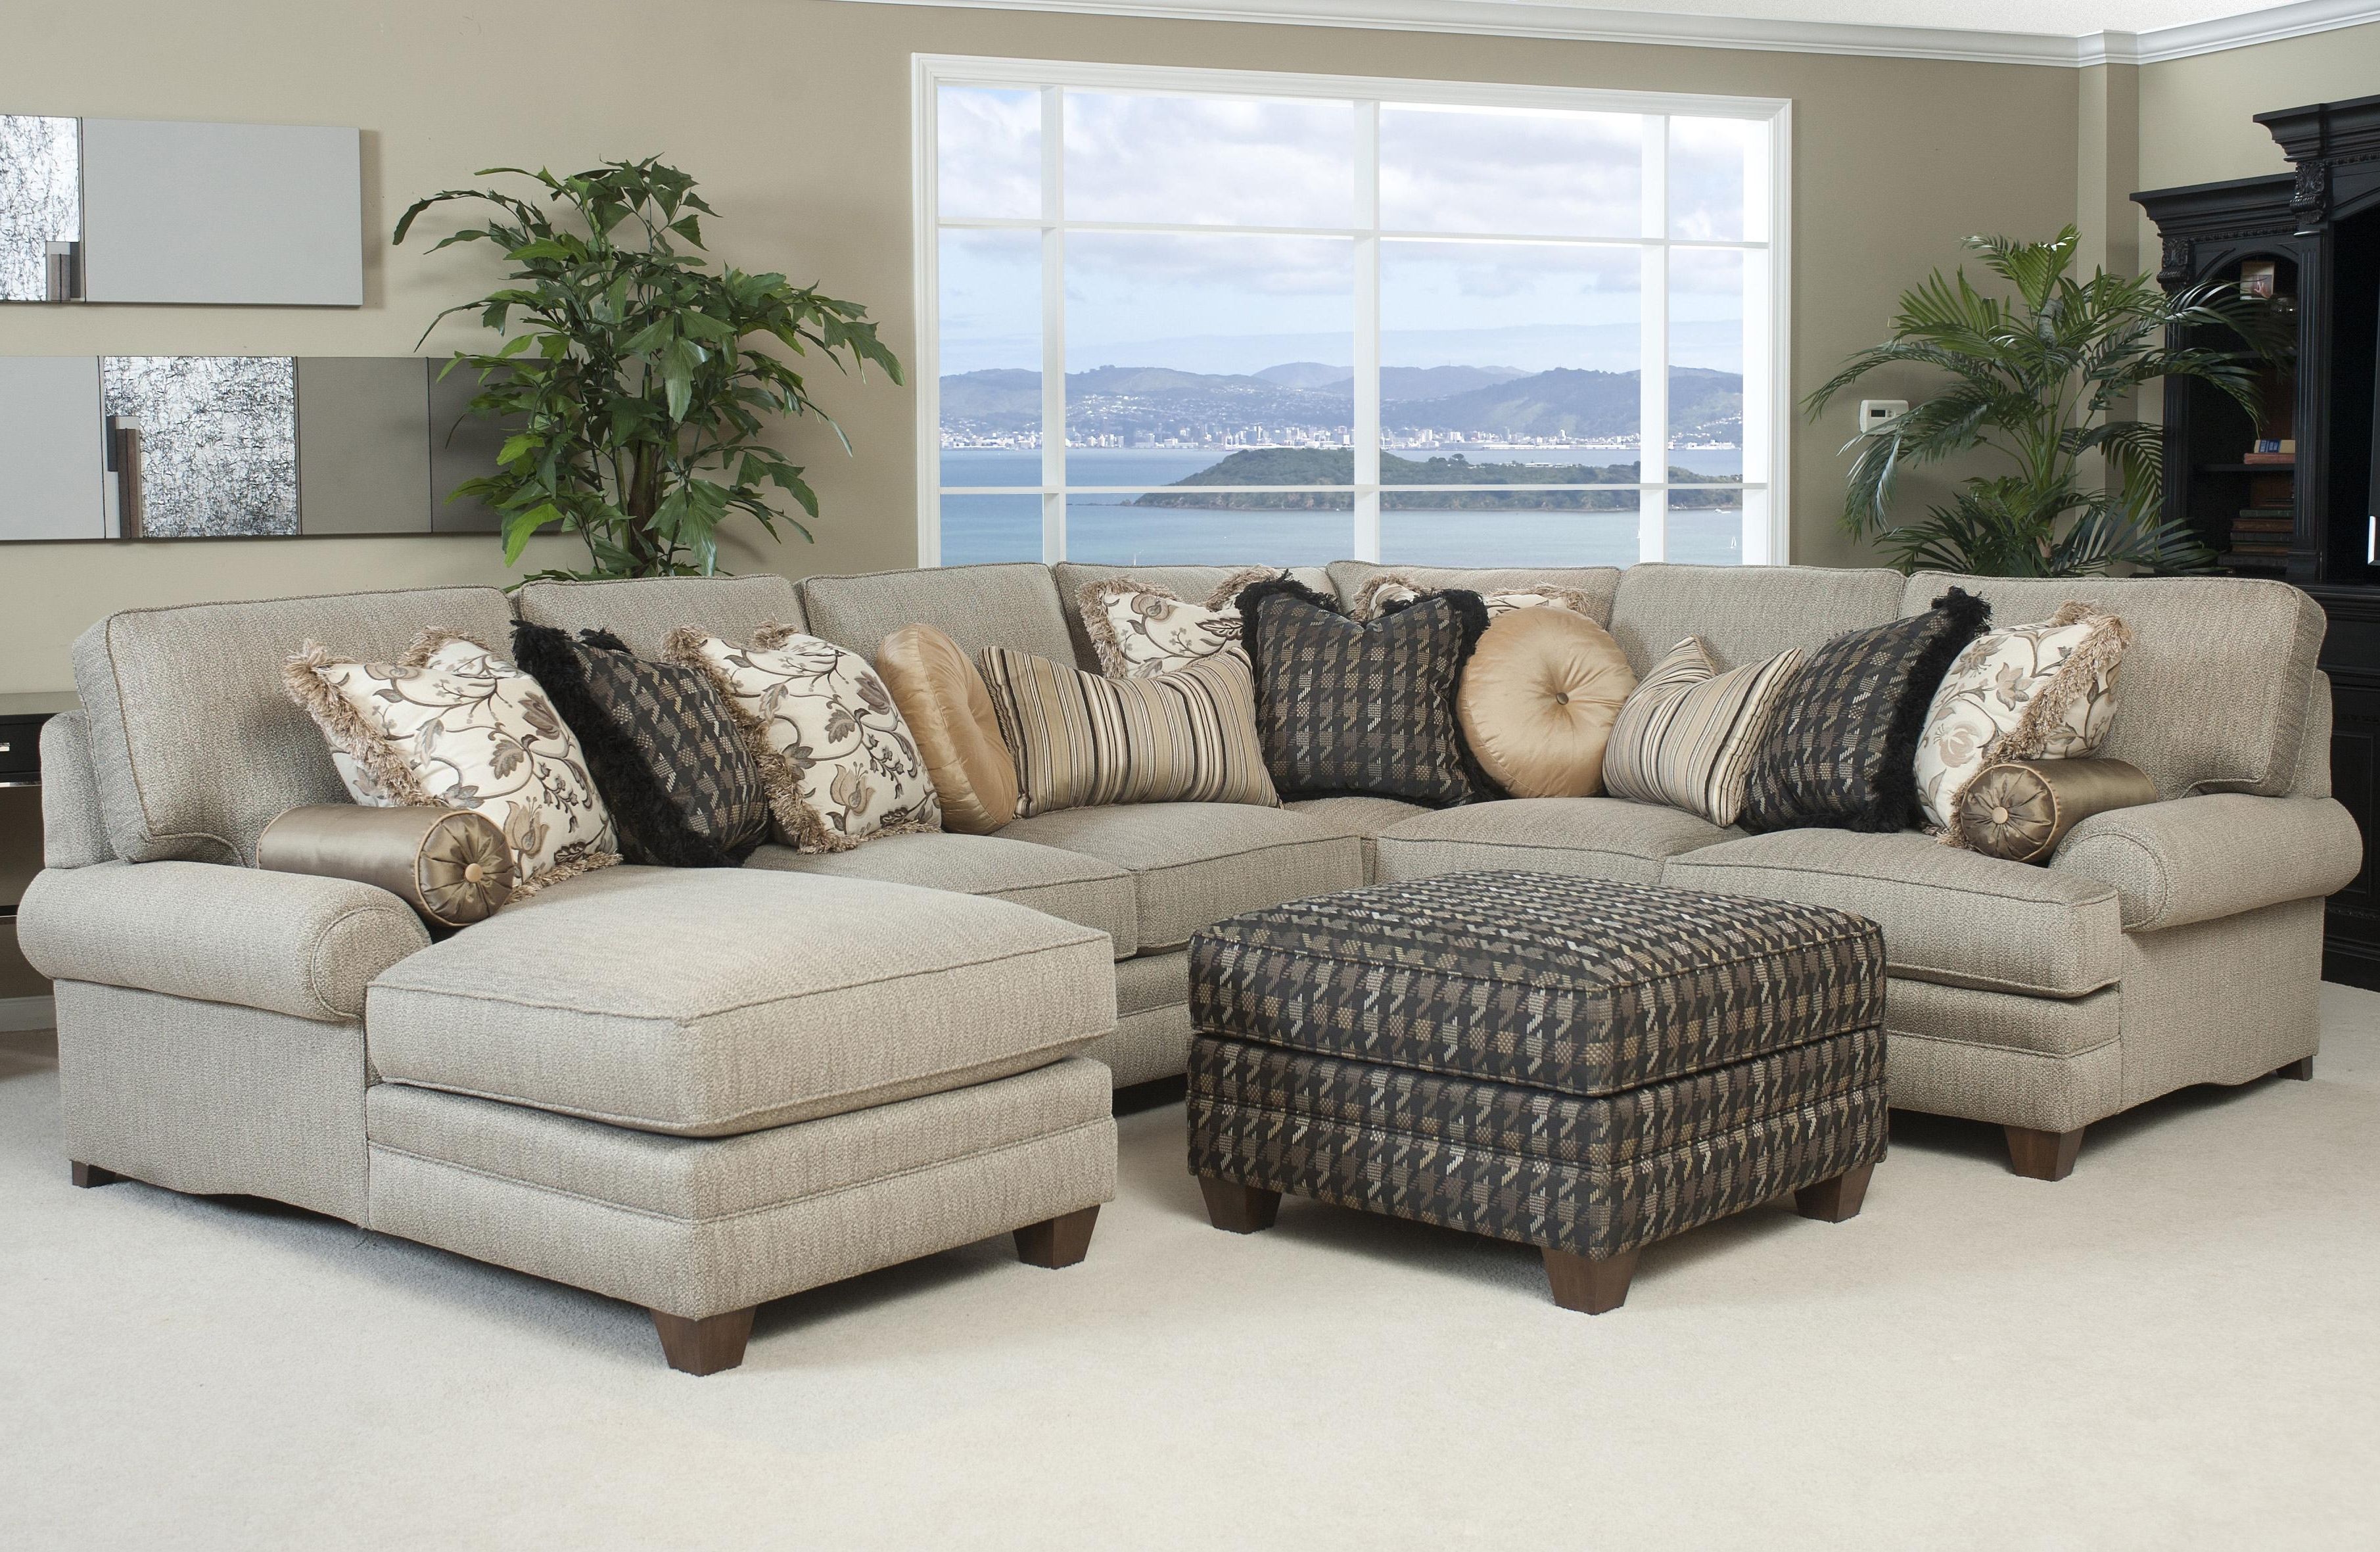 Sectional Chaise Sofas Inside Popular Sectional Sofas Chaise – Home Design Ideas And Pictures (View 12 of 15)